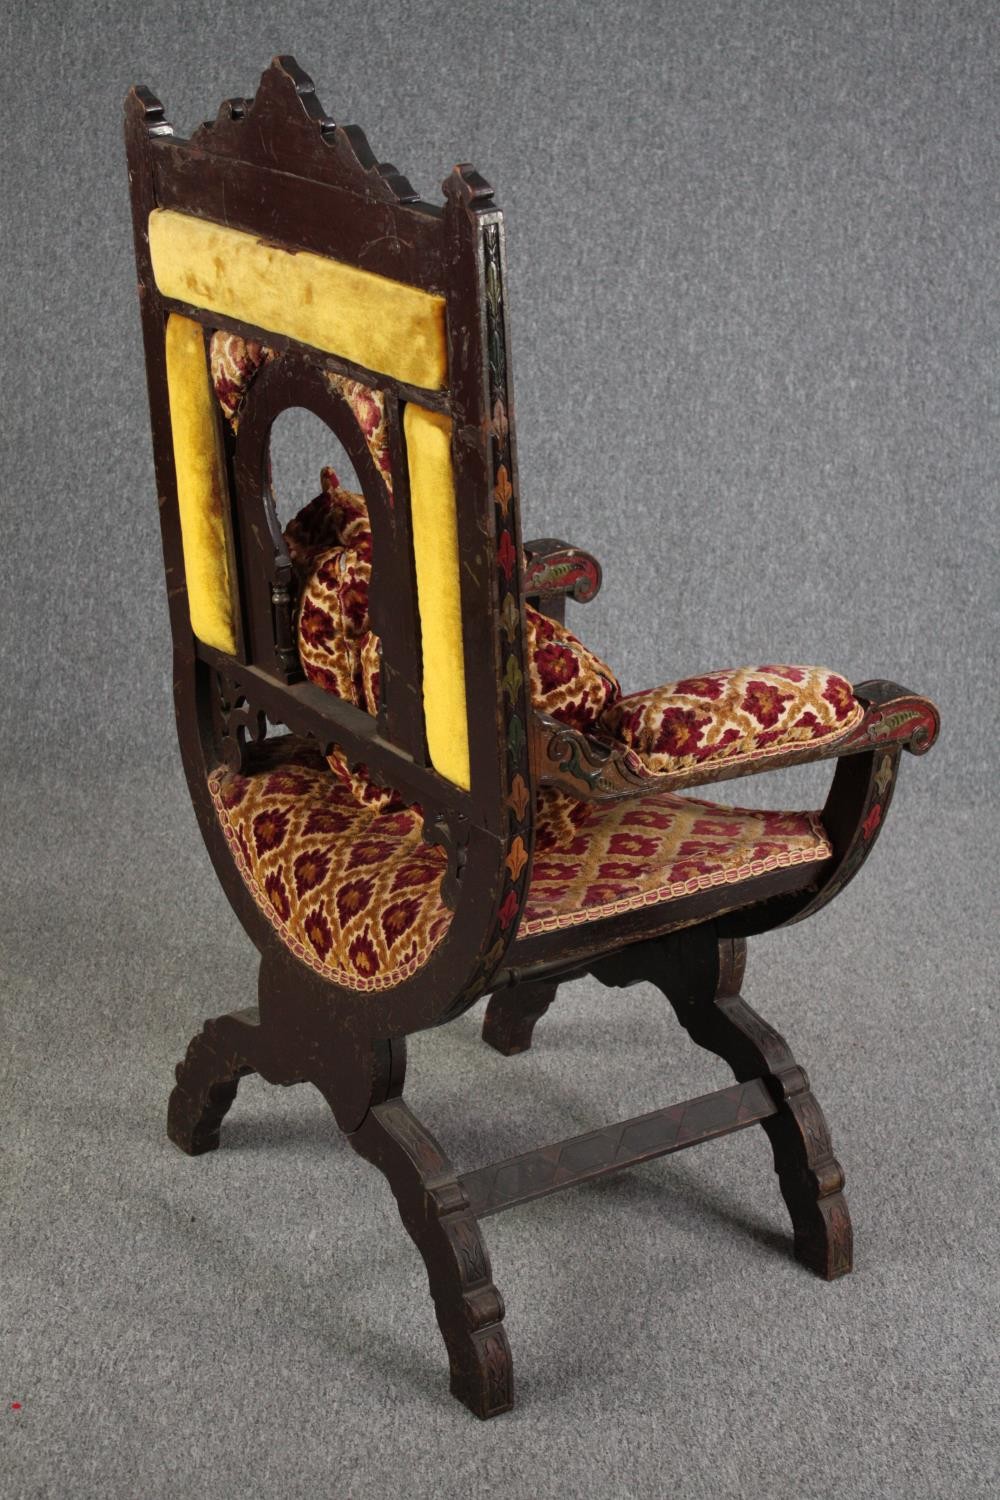 Throne chair, late 19th century polychrome of Eastern influence, signed or inscribed to the front. - Image 3 of 8